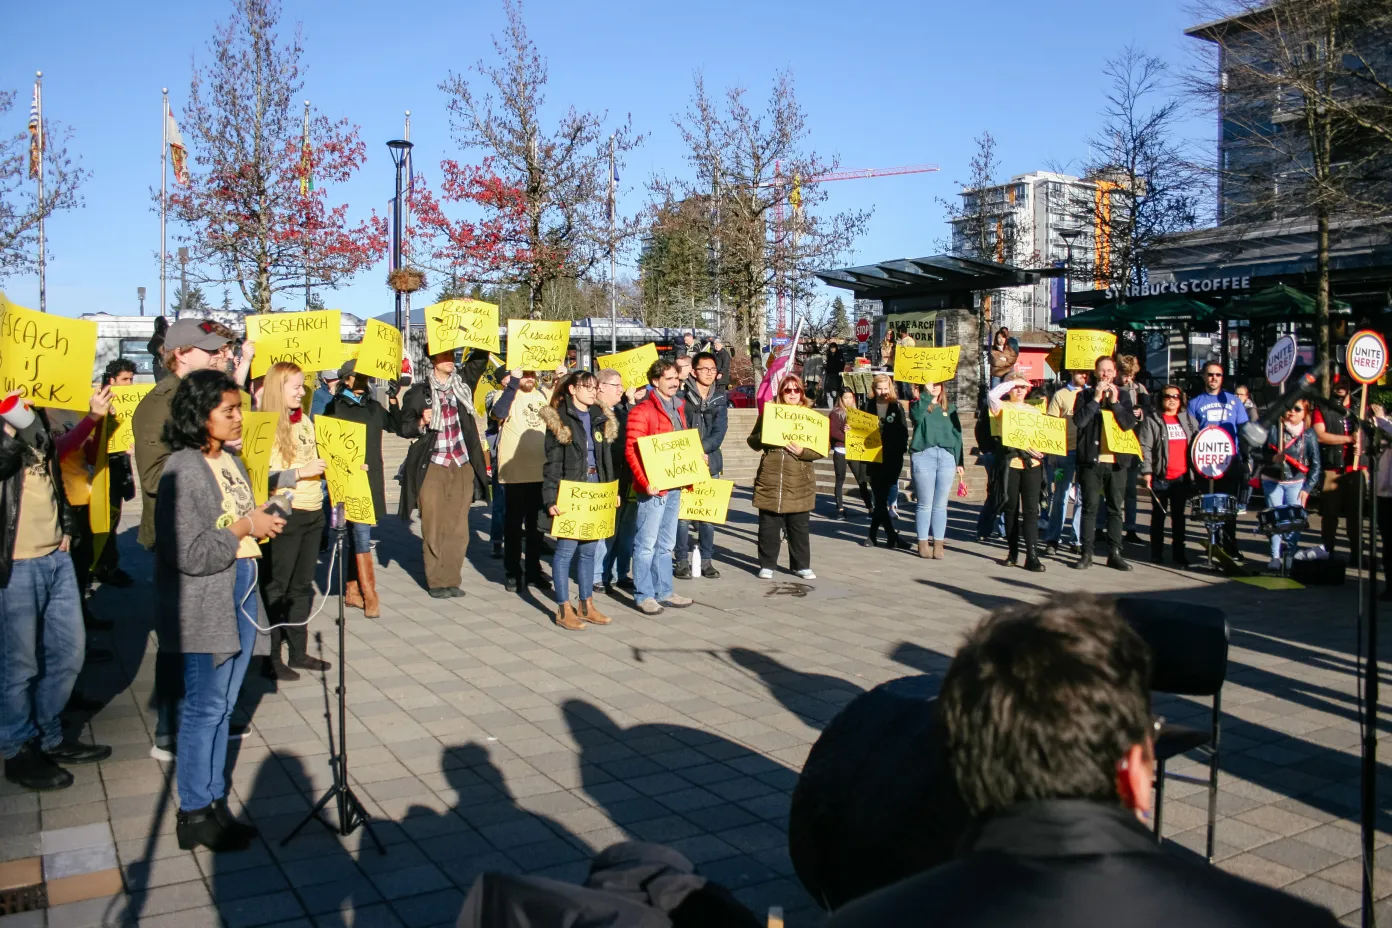 A group of people gathered around Cornerstone at SFU Burnaby campus holding yellow signs that say “Research is work”